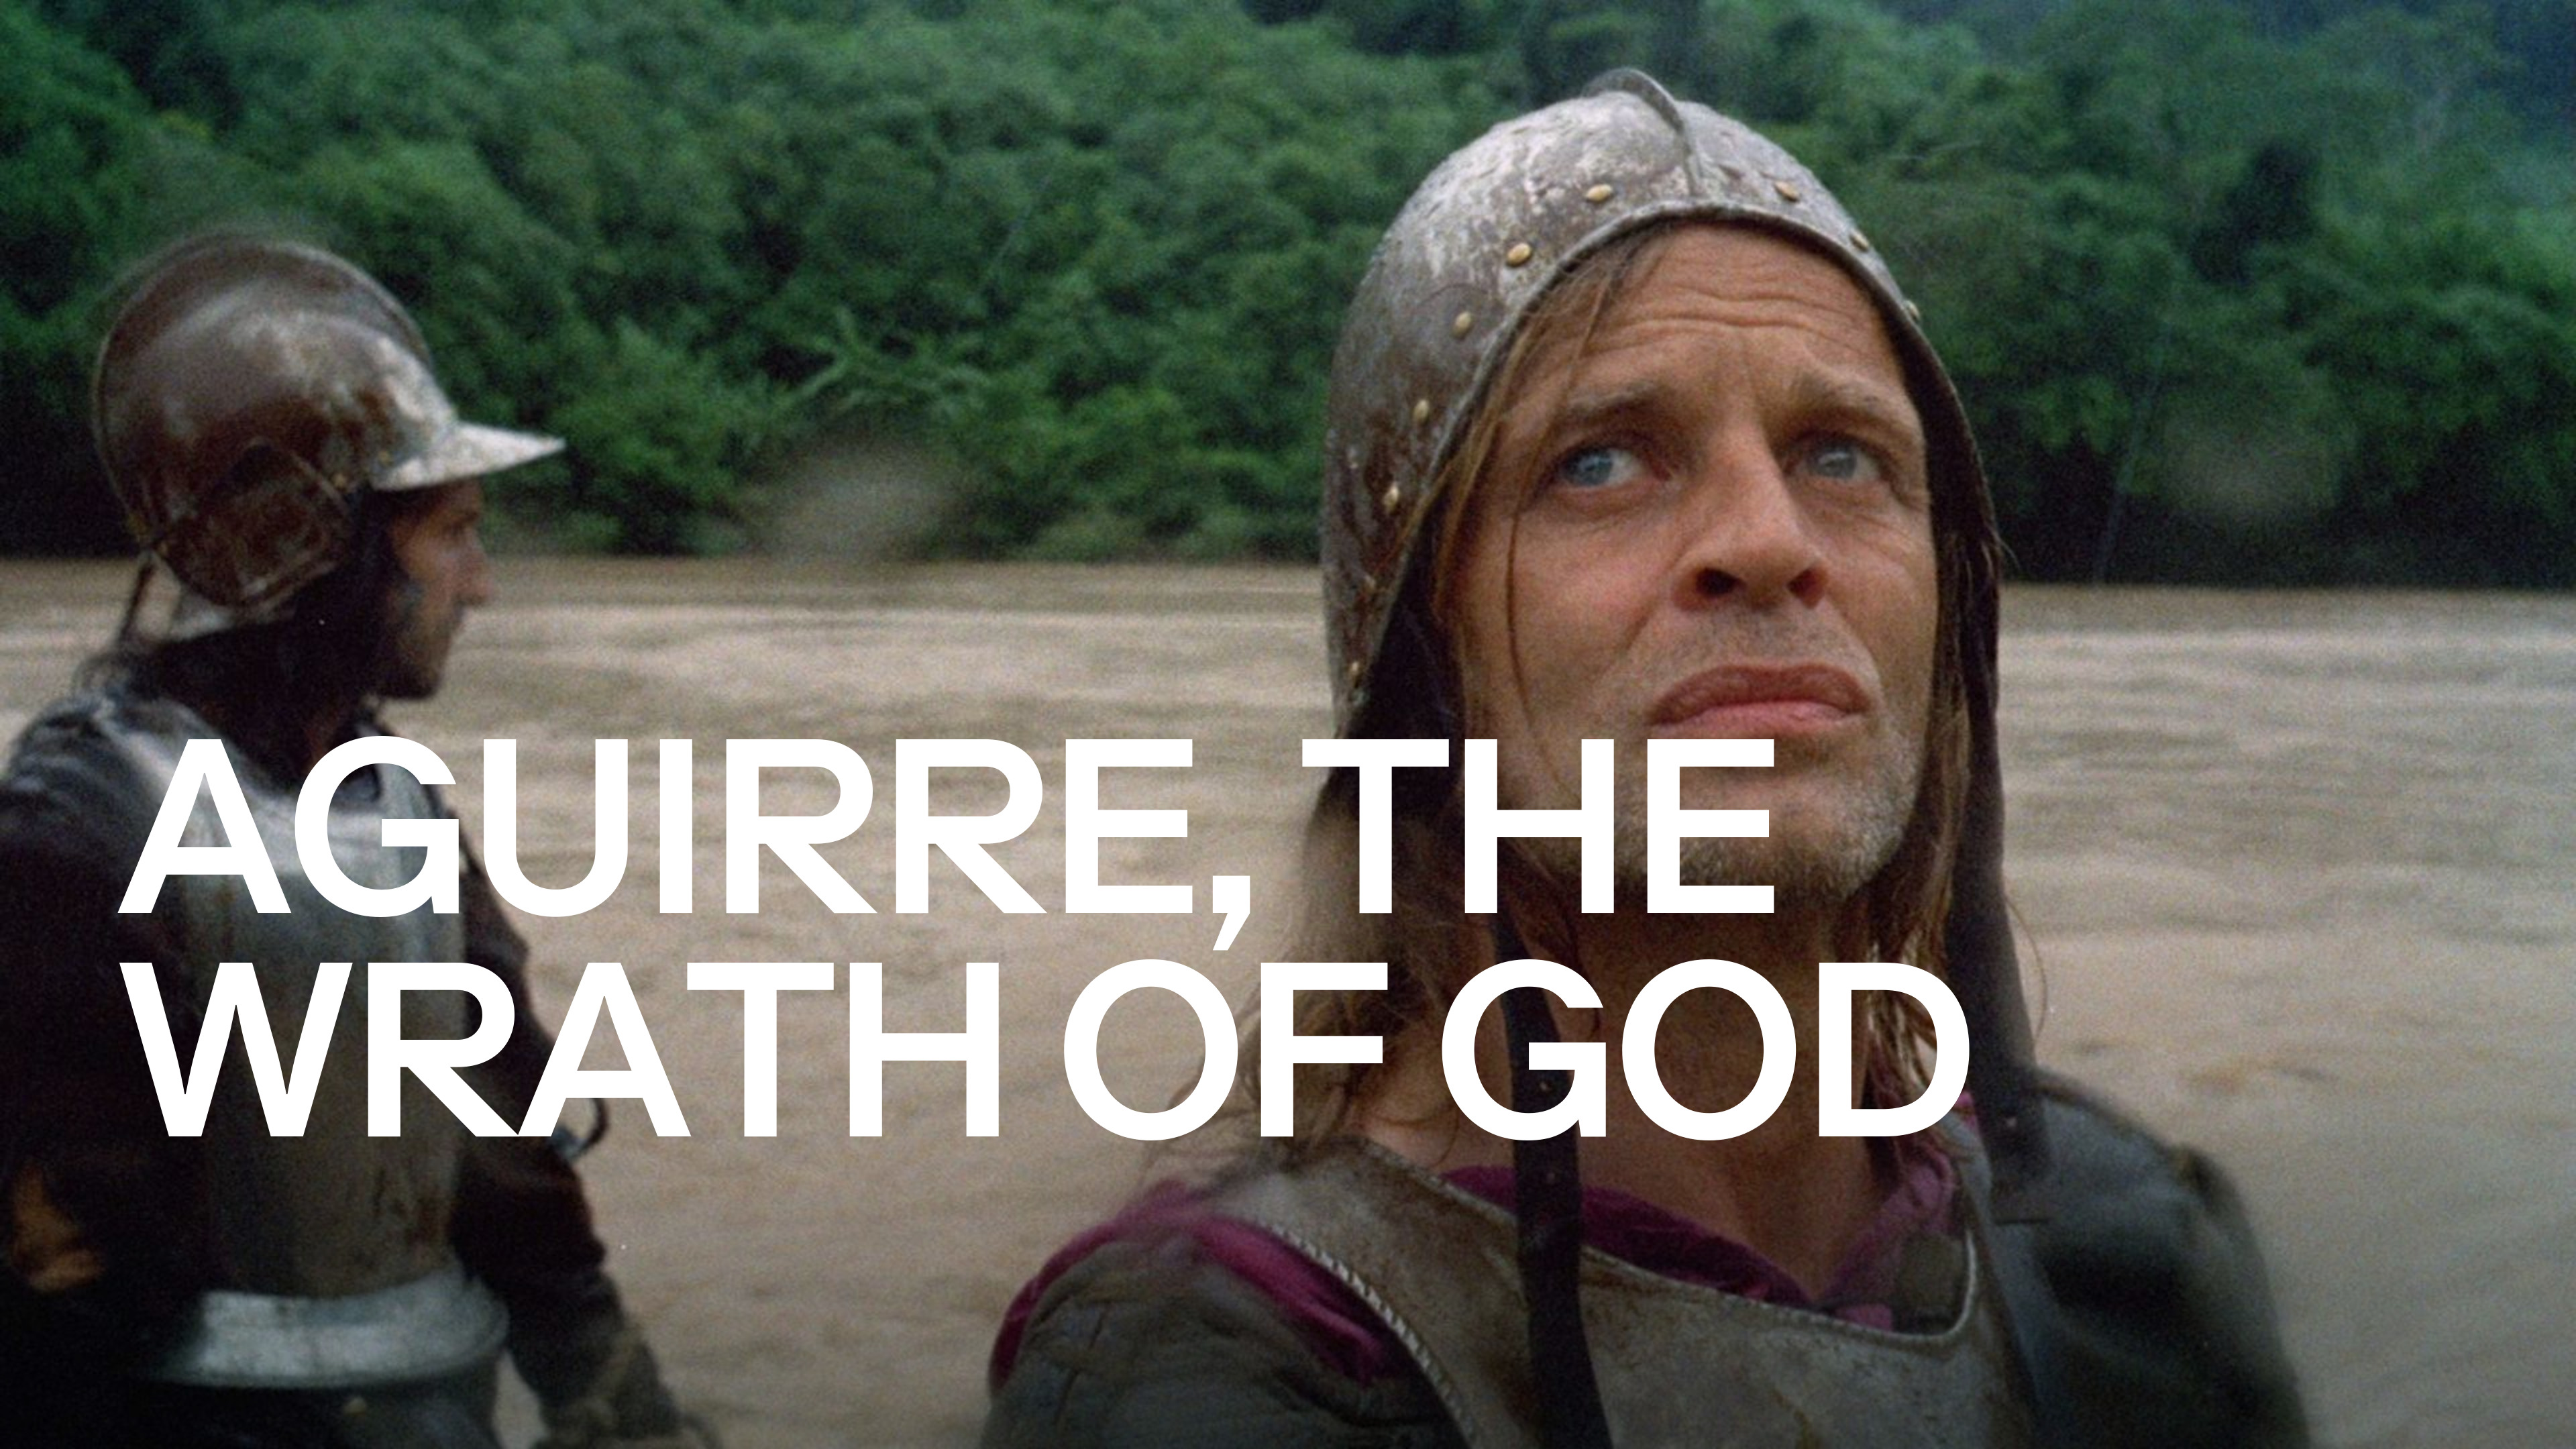 33-facts-about-the-movie-aguirre-the-wrath-of-god